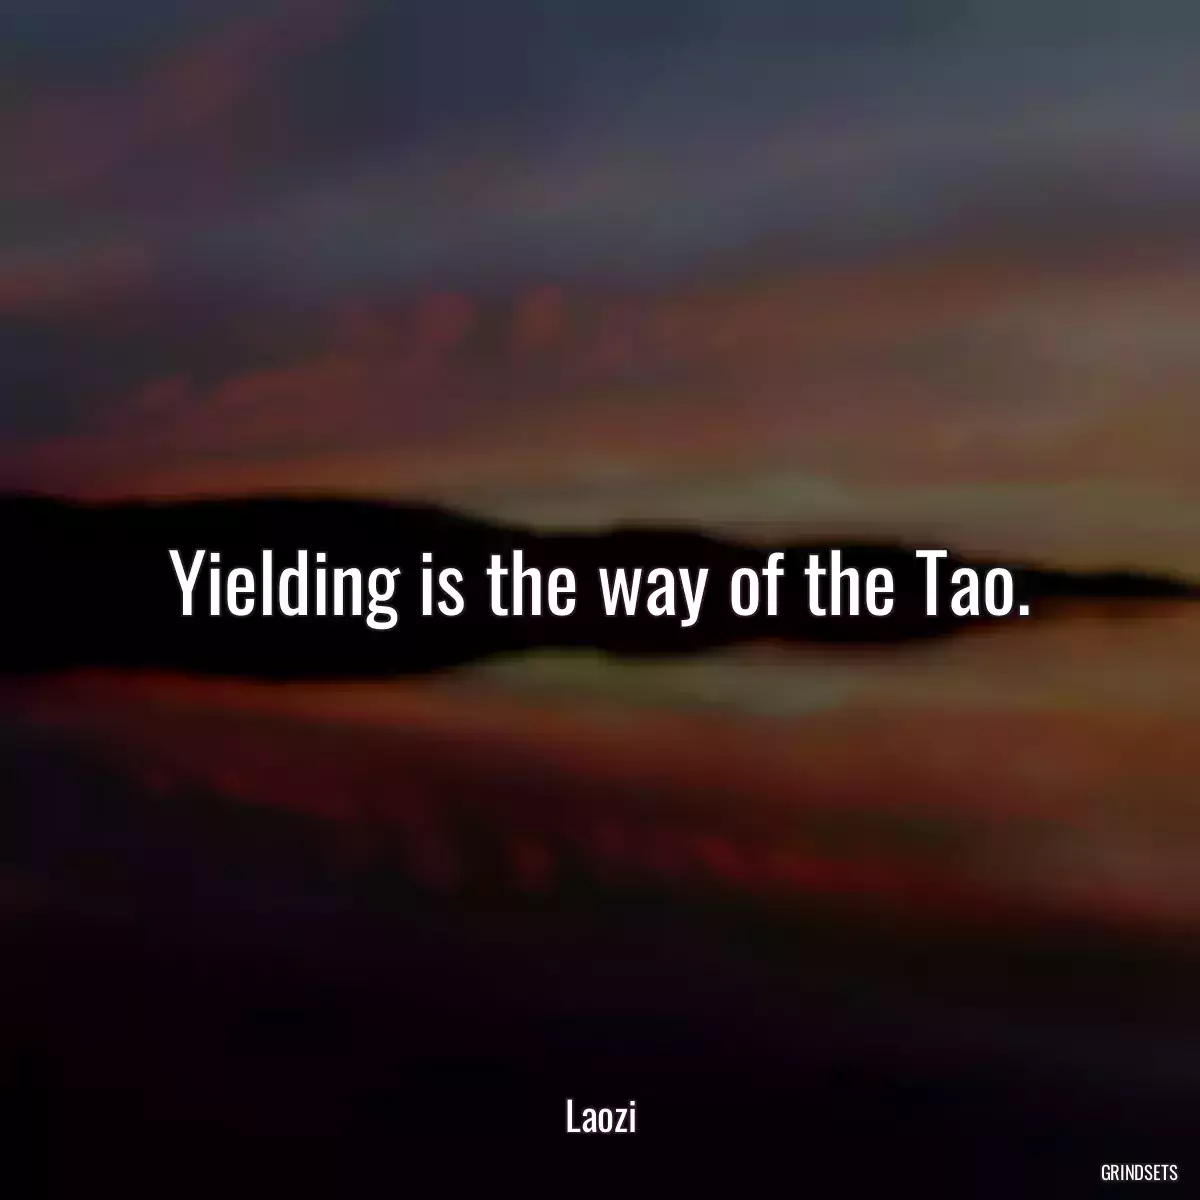 Yielding is the way of the Tao.